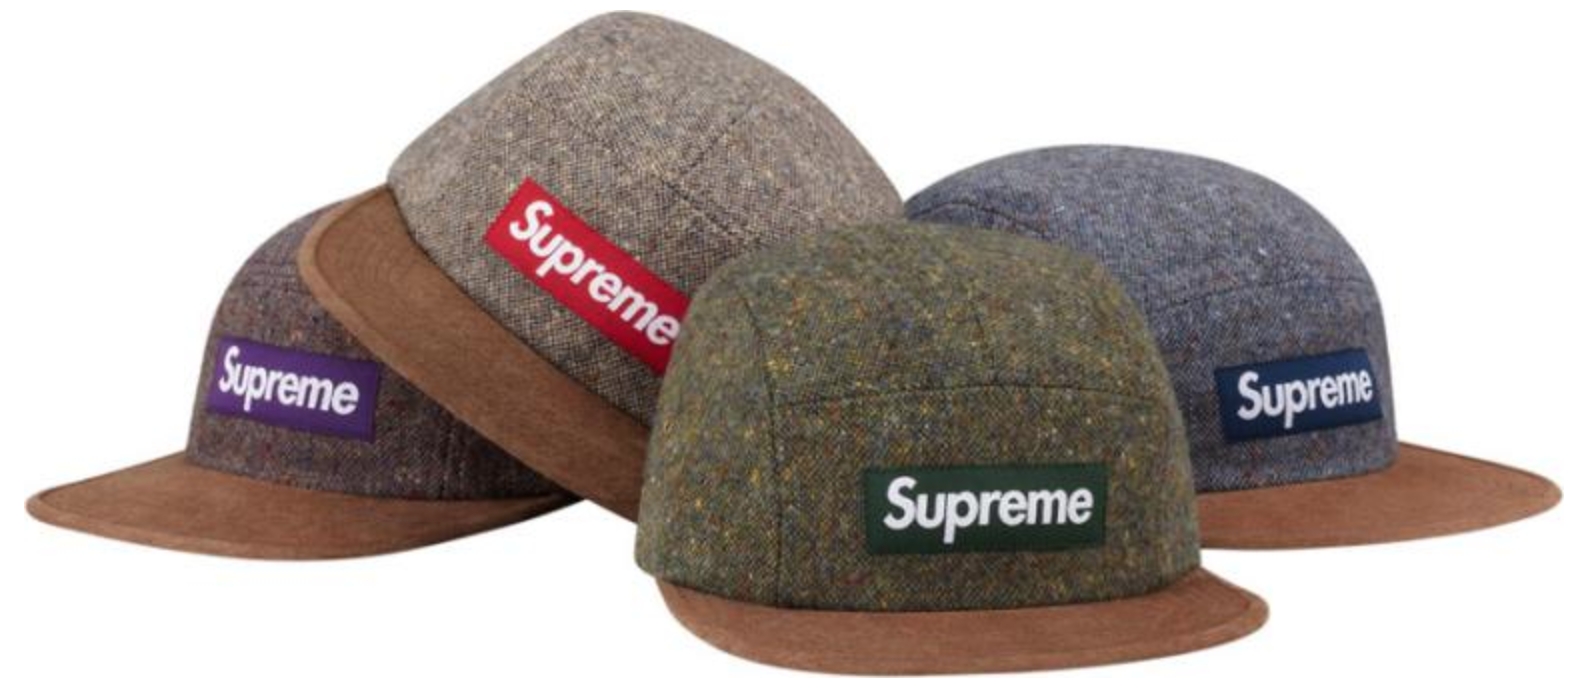 obsessed} Supreme Hats